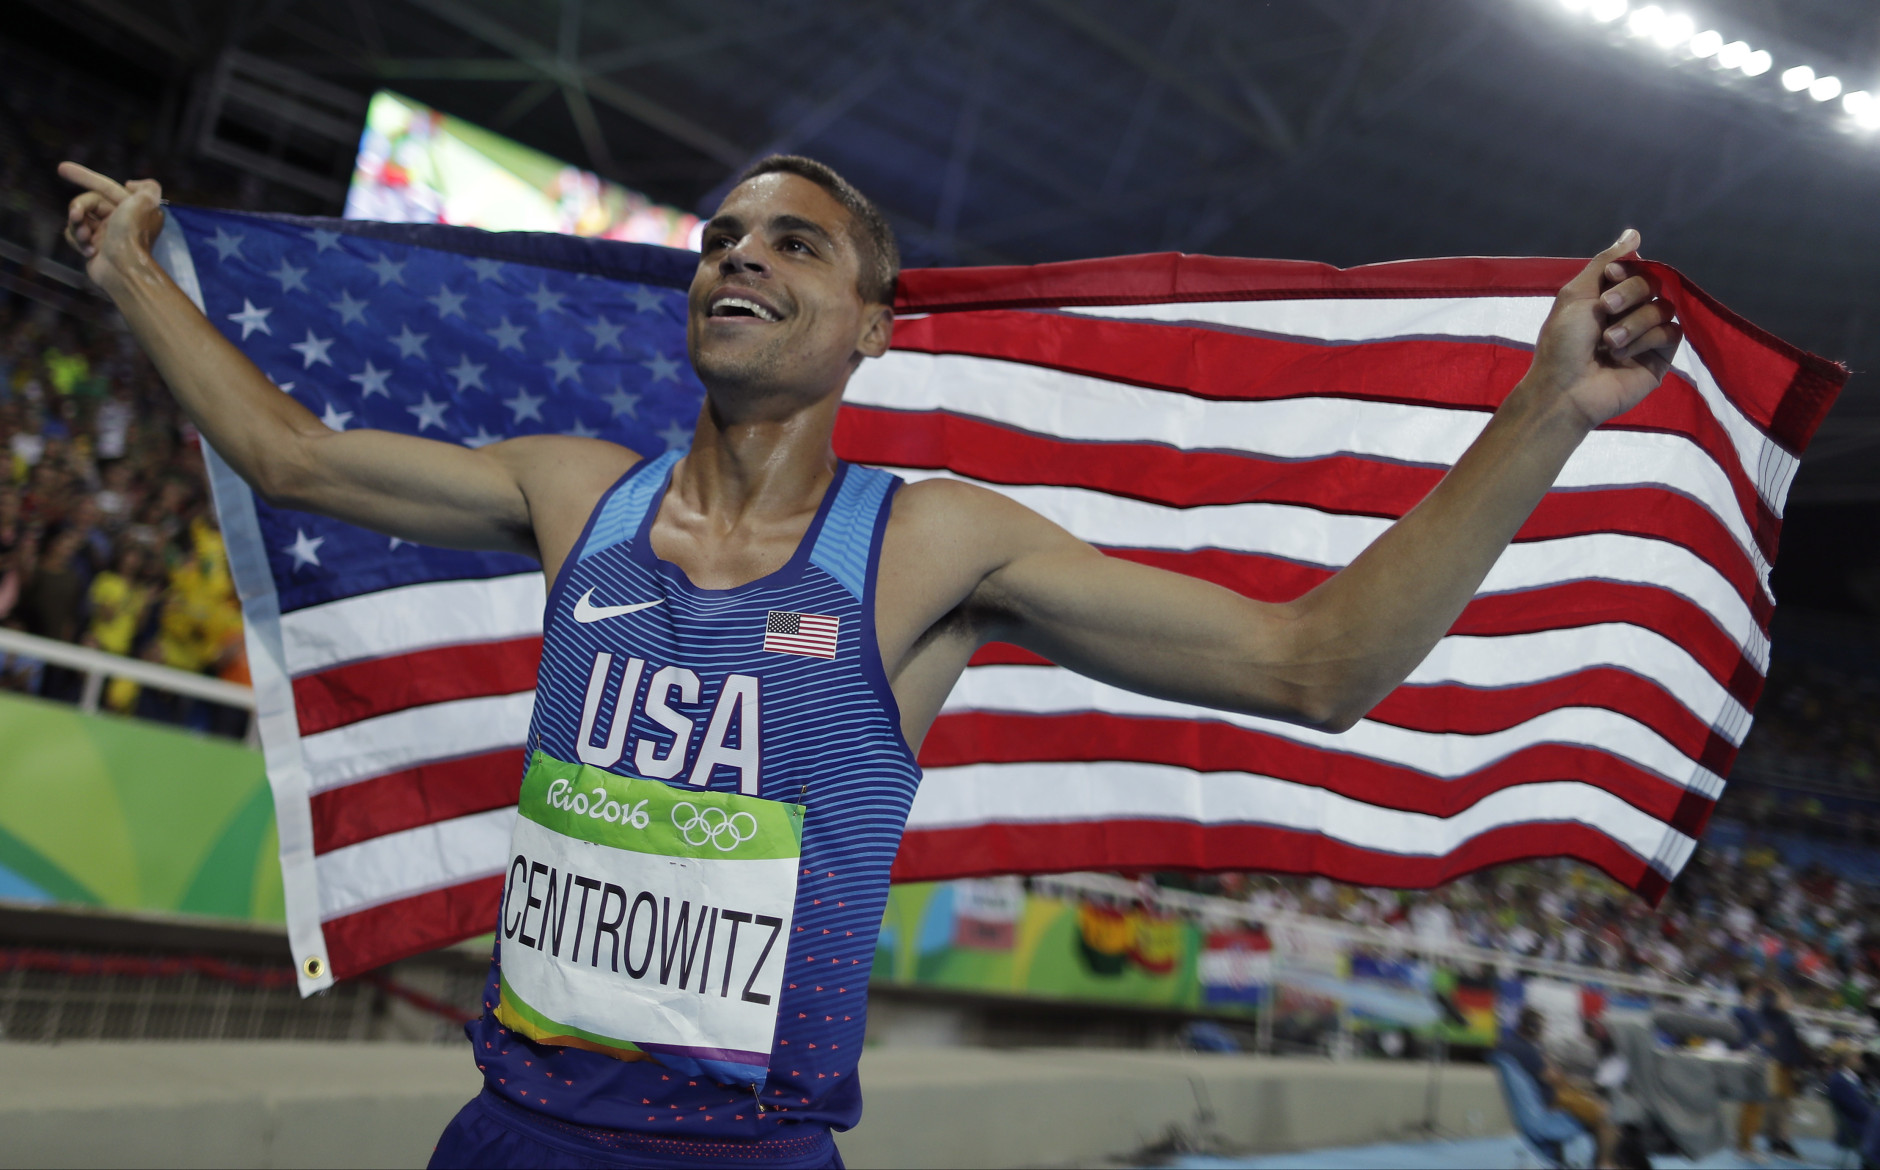 United States' Matthew Centrowitz celebrates after winning the gold medal in the men's 1500-meter final during the athletics competitions of the 2016 Summer Olympics at the Olympic stadium in Rio de Janeiro, Brazil, Saturday, Aug. 20, 2016. (AP Photo/Matt Slocum)